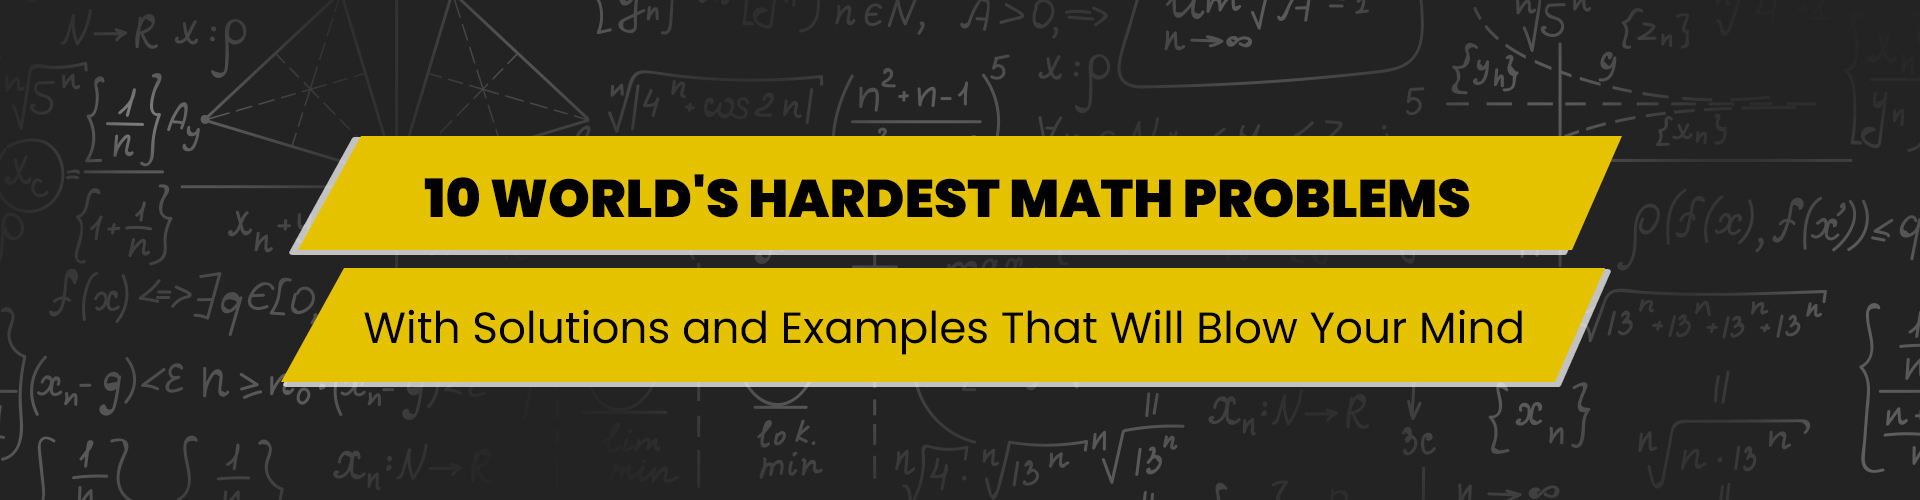 World's Hardest Math Problems With Solutions